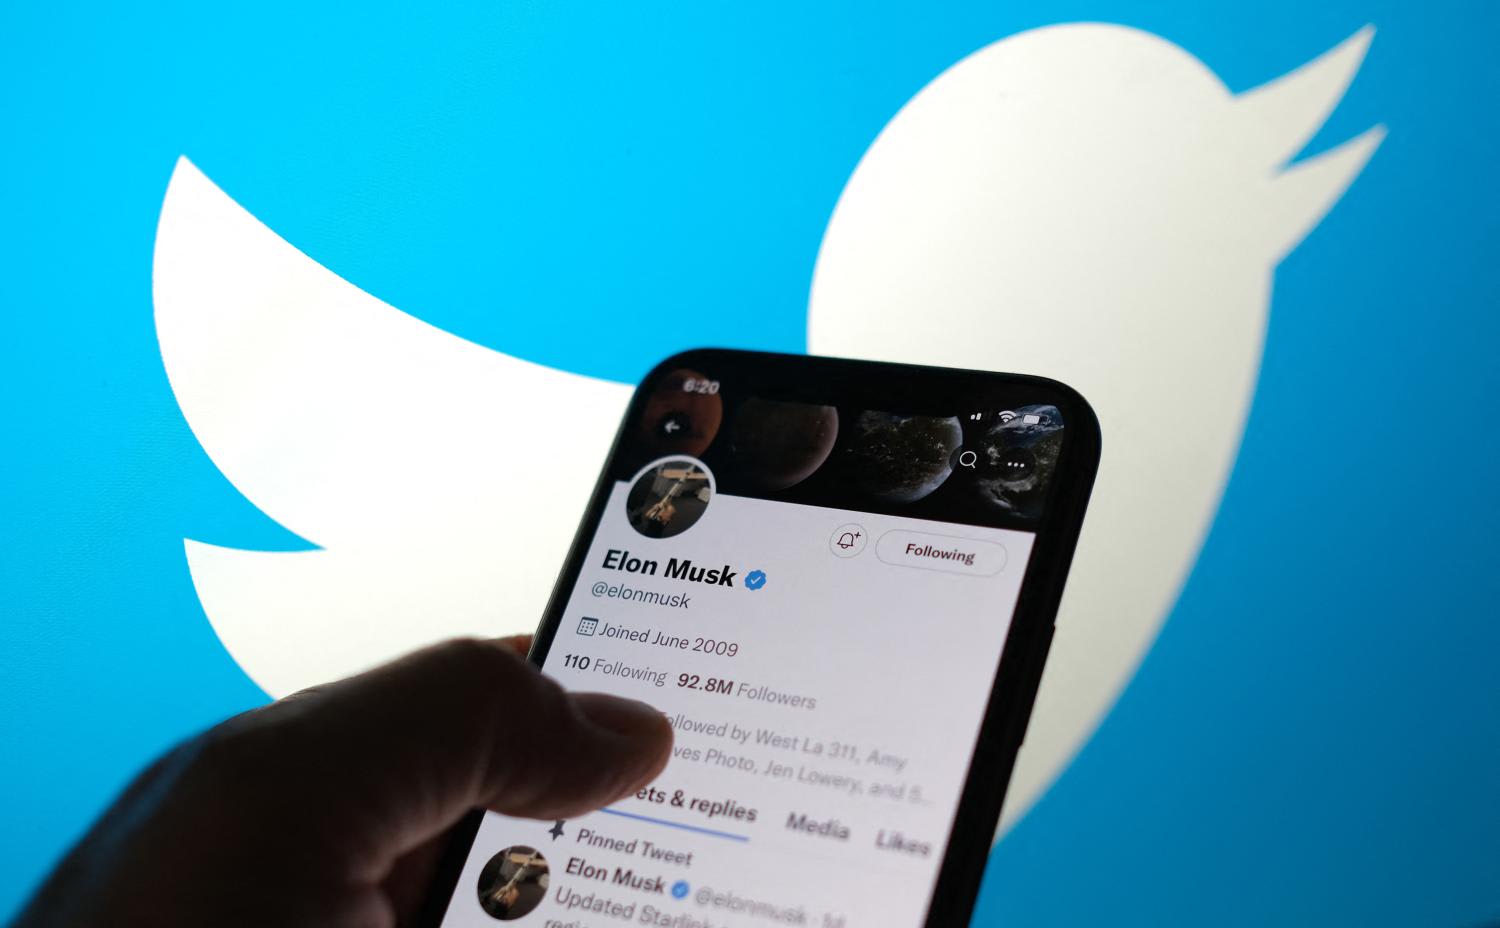 The Tesla chief threatened to back out of his deal to purchase Twitter, accusing it of failing to provide data on fake accounts.